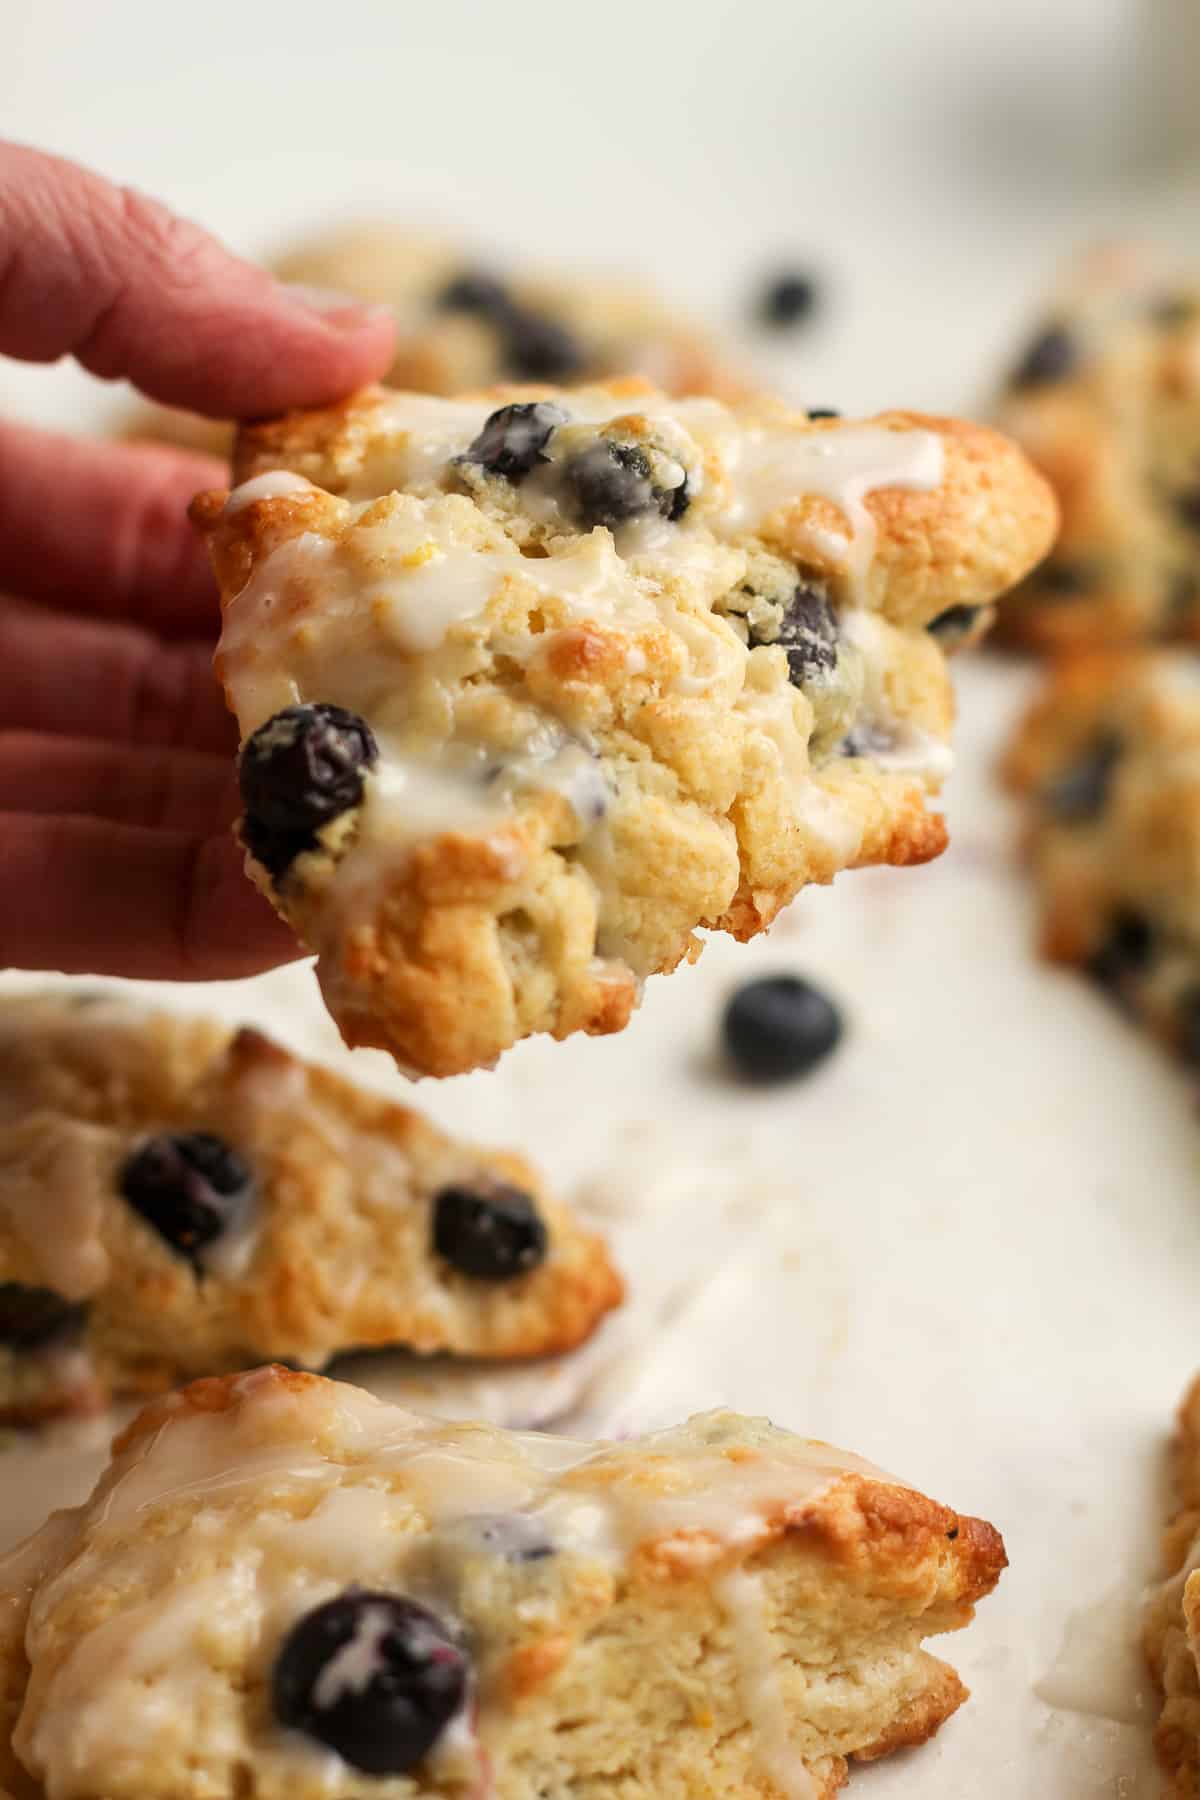 A hand holding a blueberry scone.